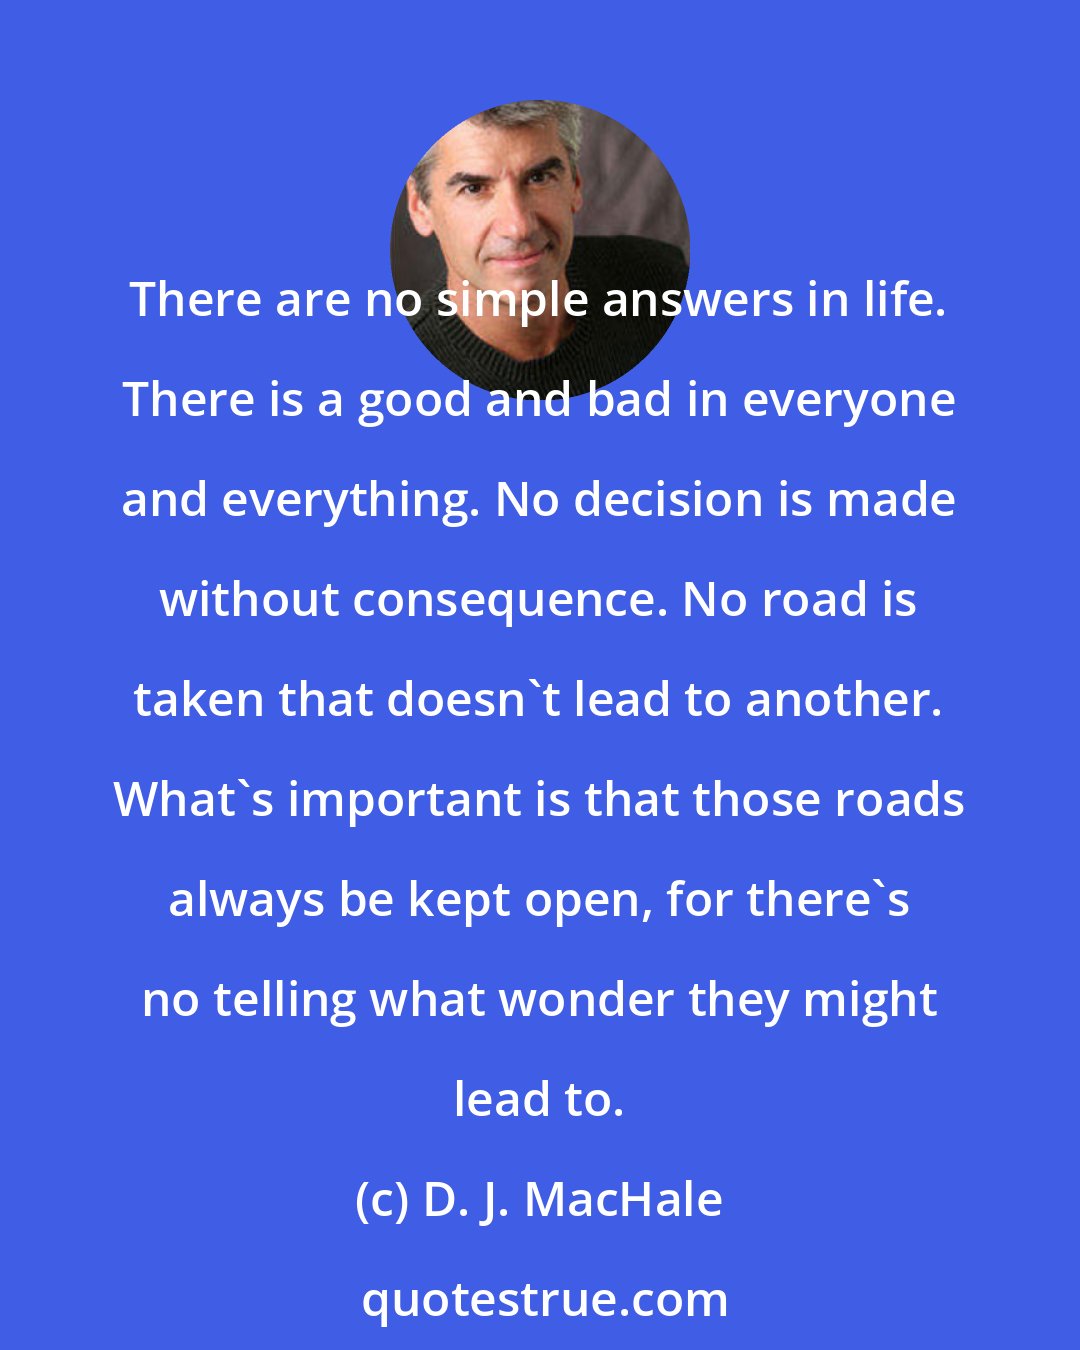 D. J. MacHale: There are no simple answers in life. There is a good and bad in everyone and everything. No decision is made without consequence. No road is taken that doesn't lead to another. What's important is that those roads always be kept open, for there's no telling what wonder they might lead to.